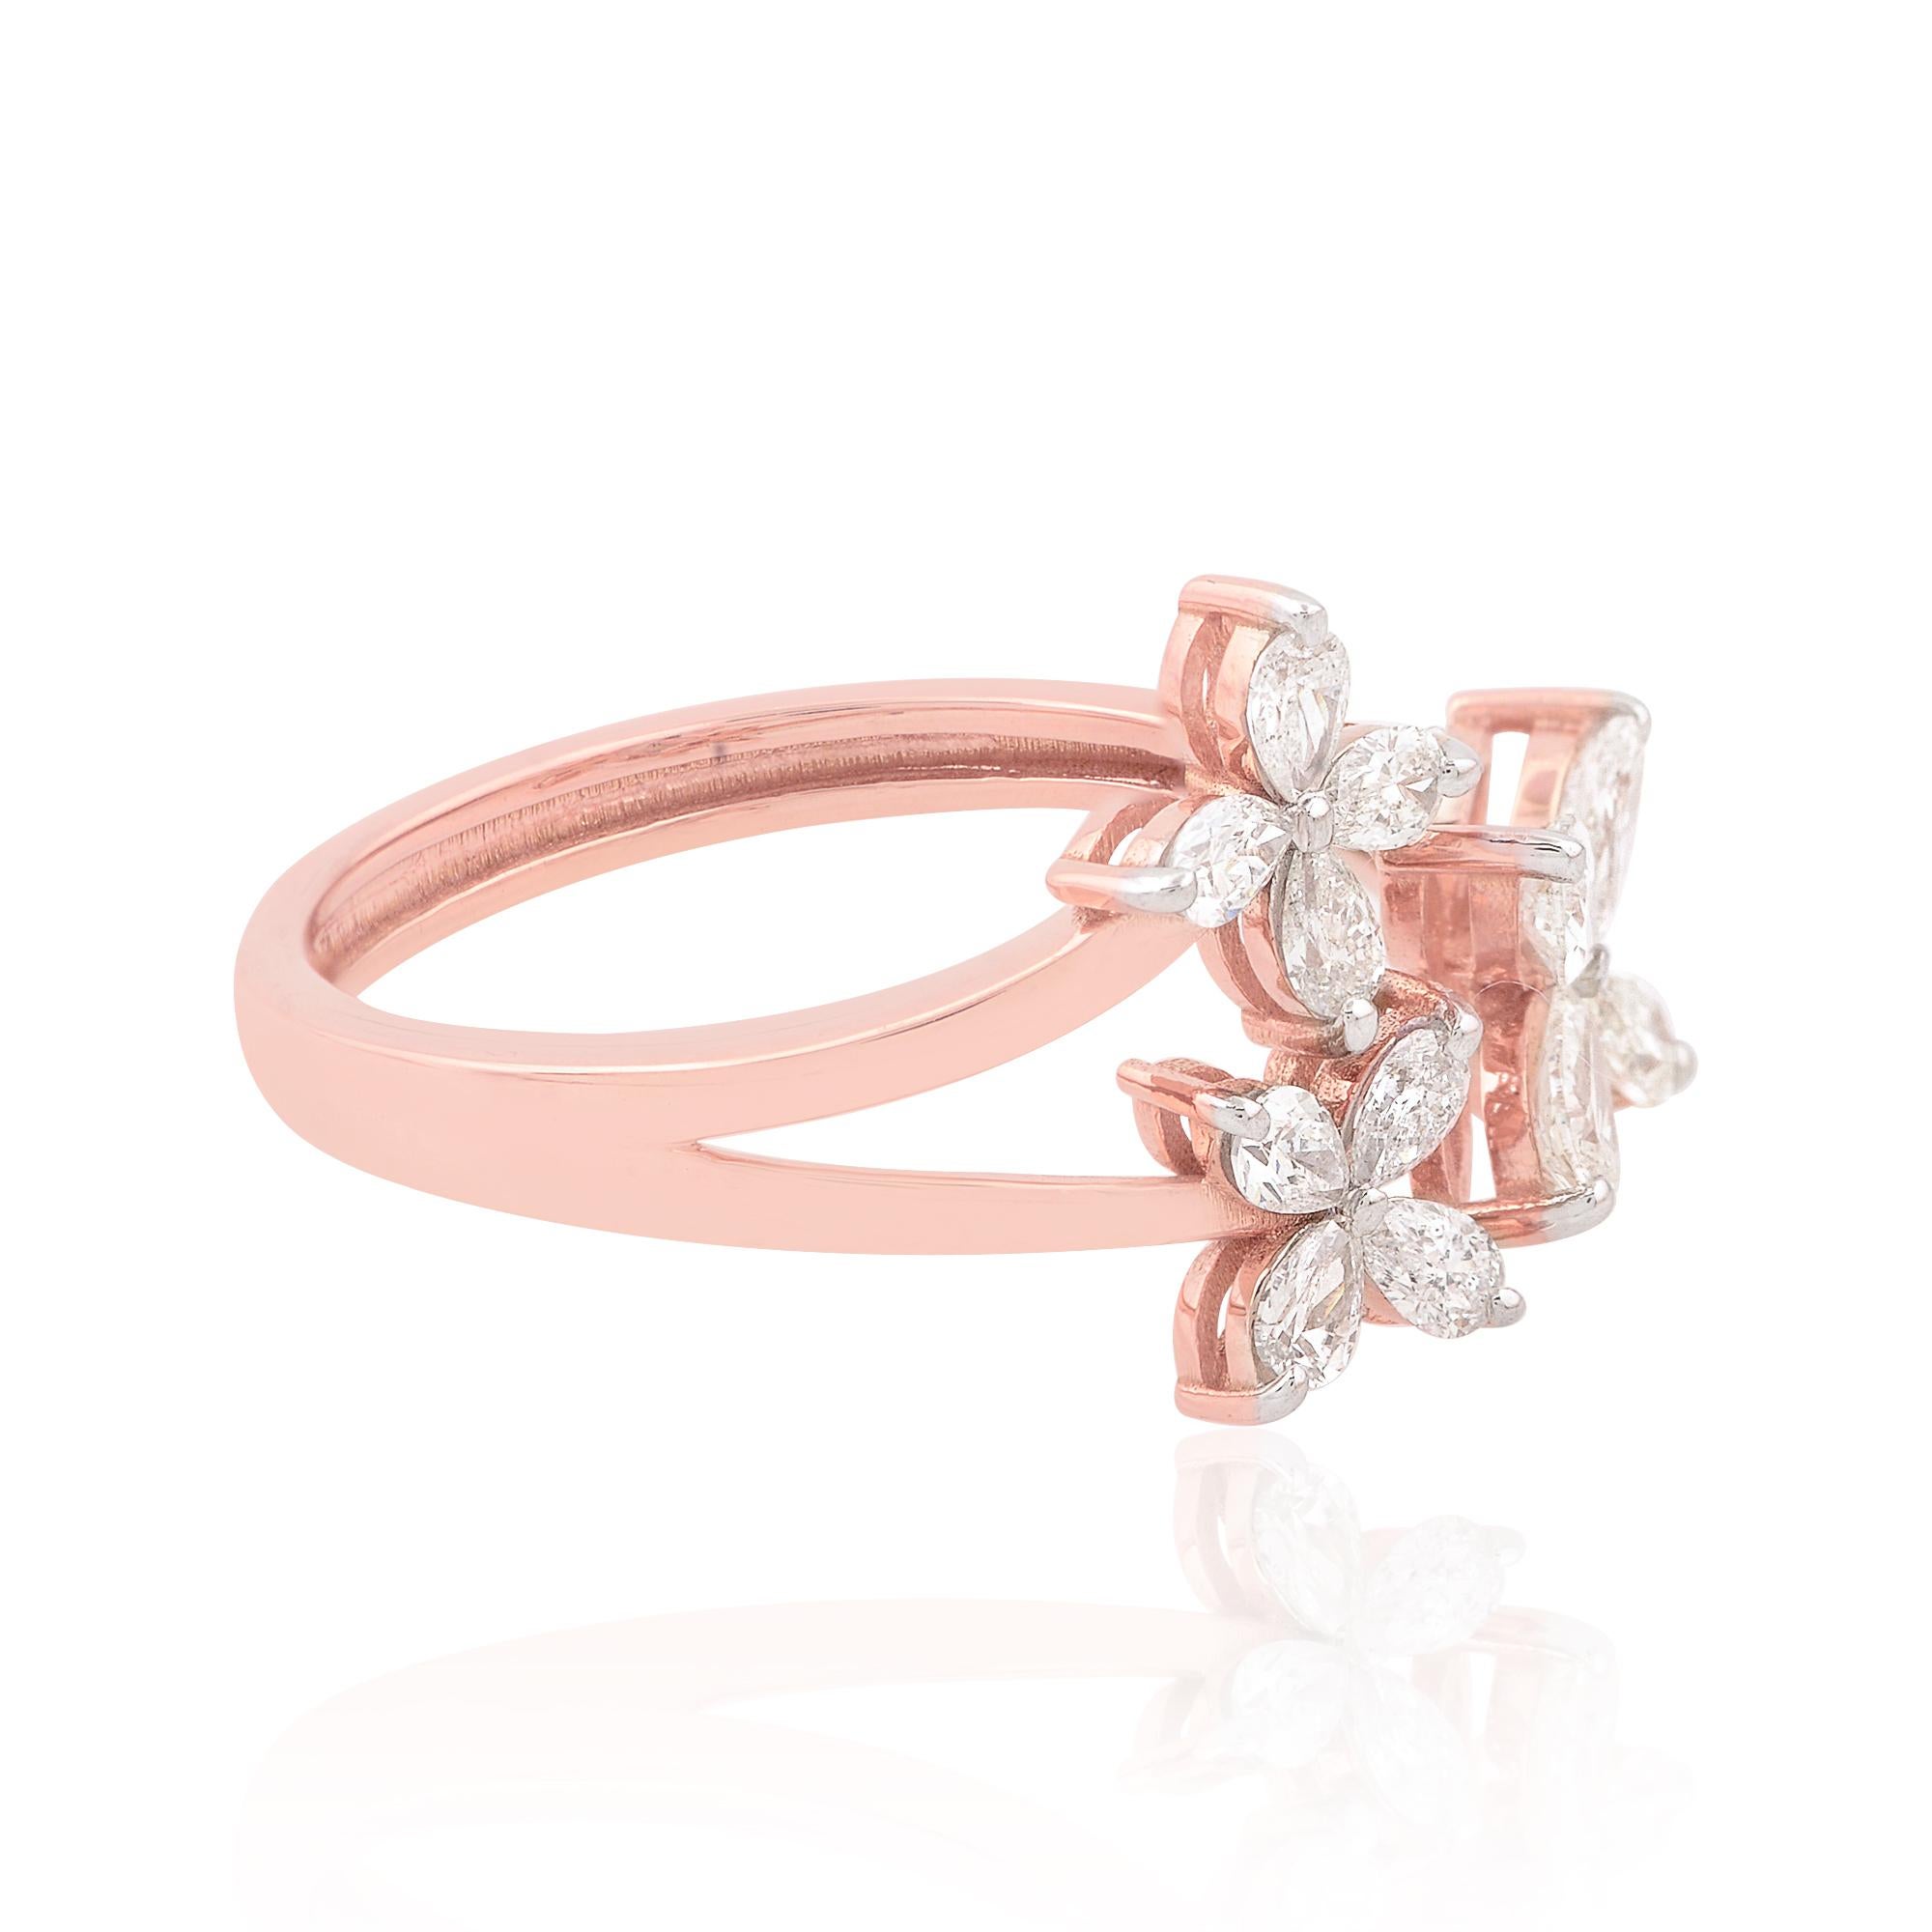 For Sale:  0.68 Carat SI Clarity HI Color Pear Diamond Flower Ring 18k Rose Gold Jewelry 2